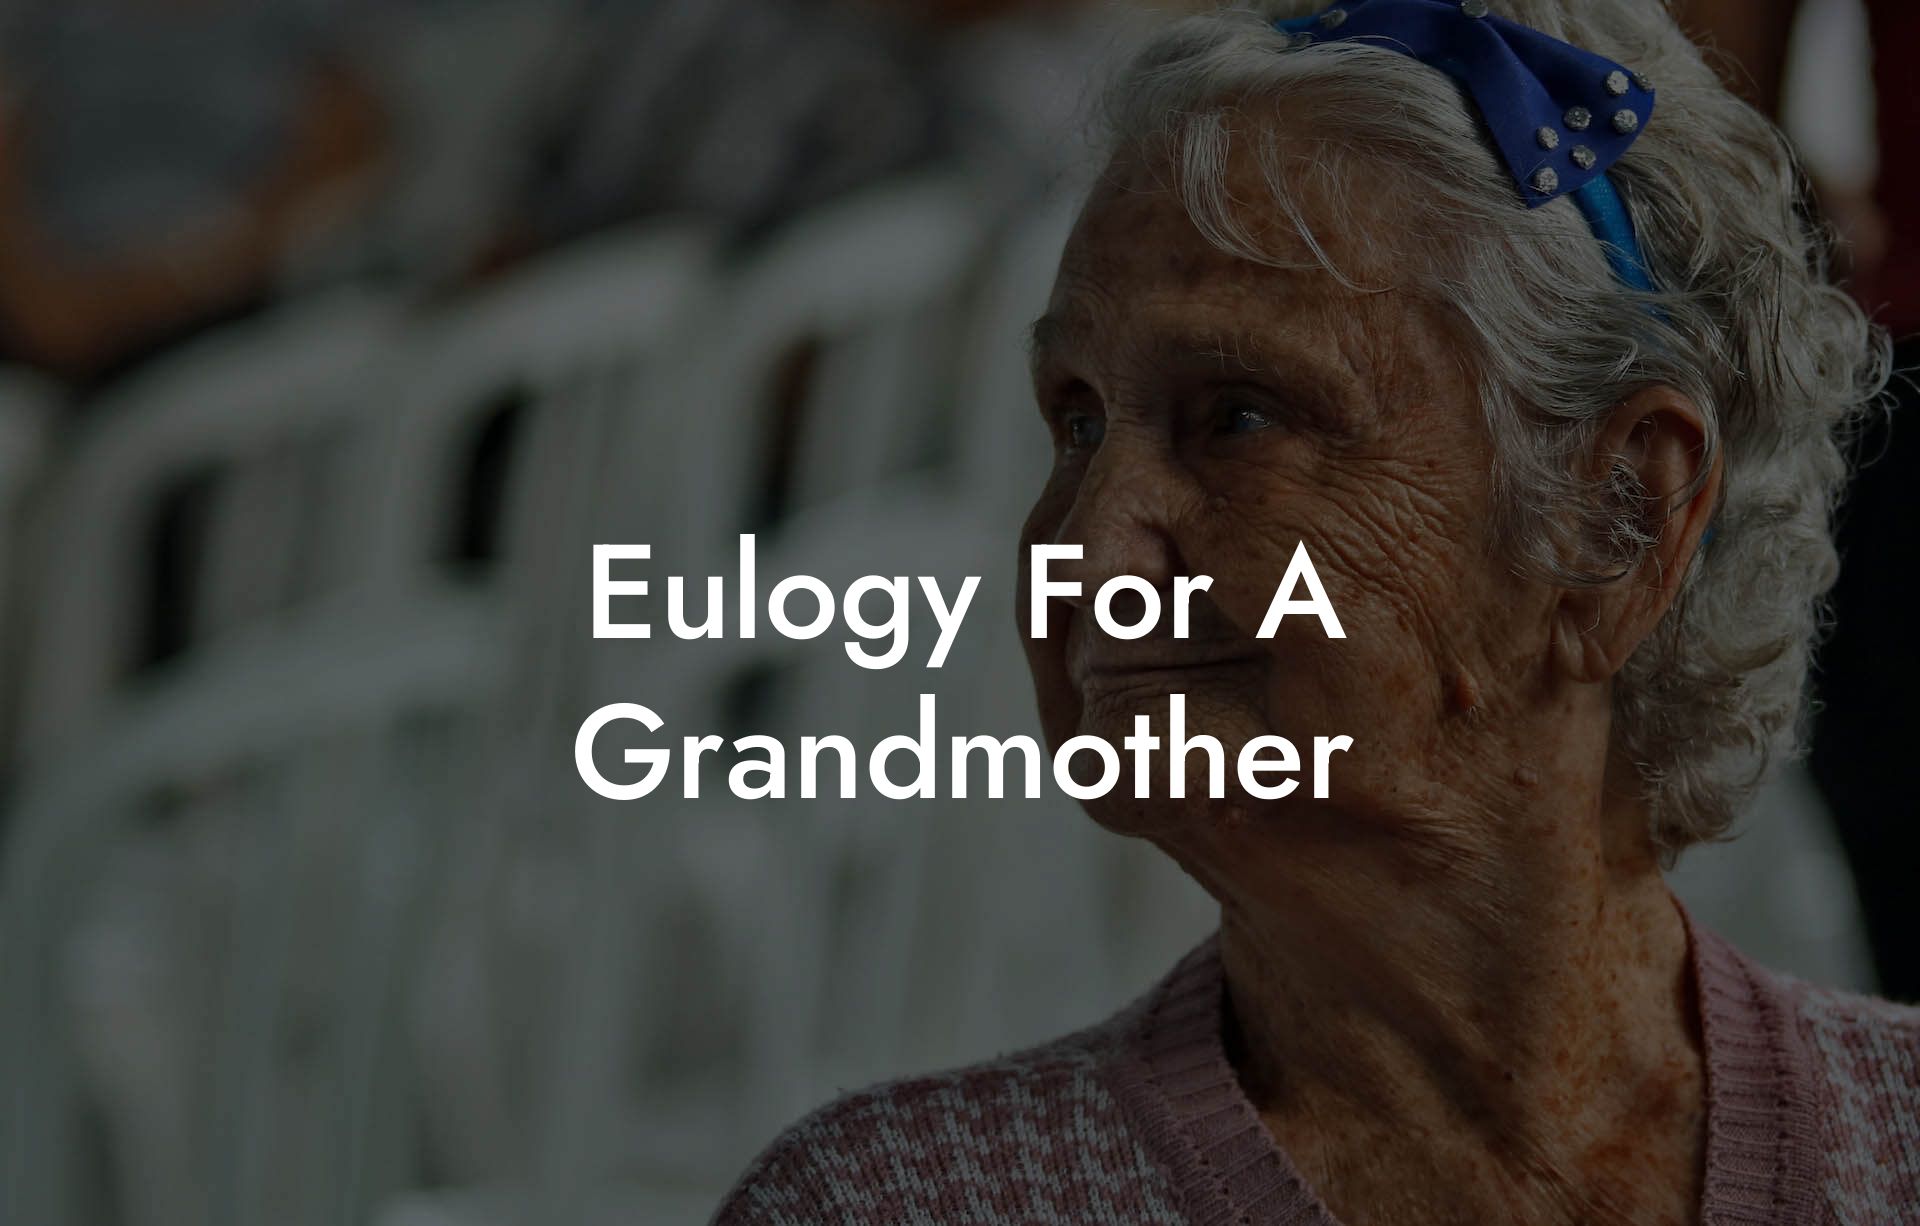 Eulogy For A Grandmother